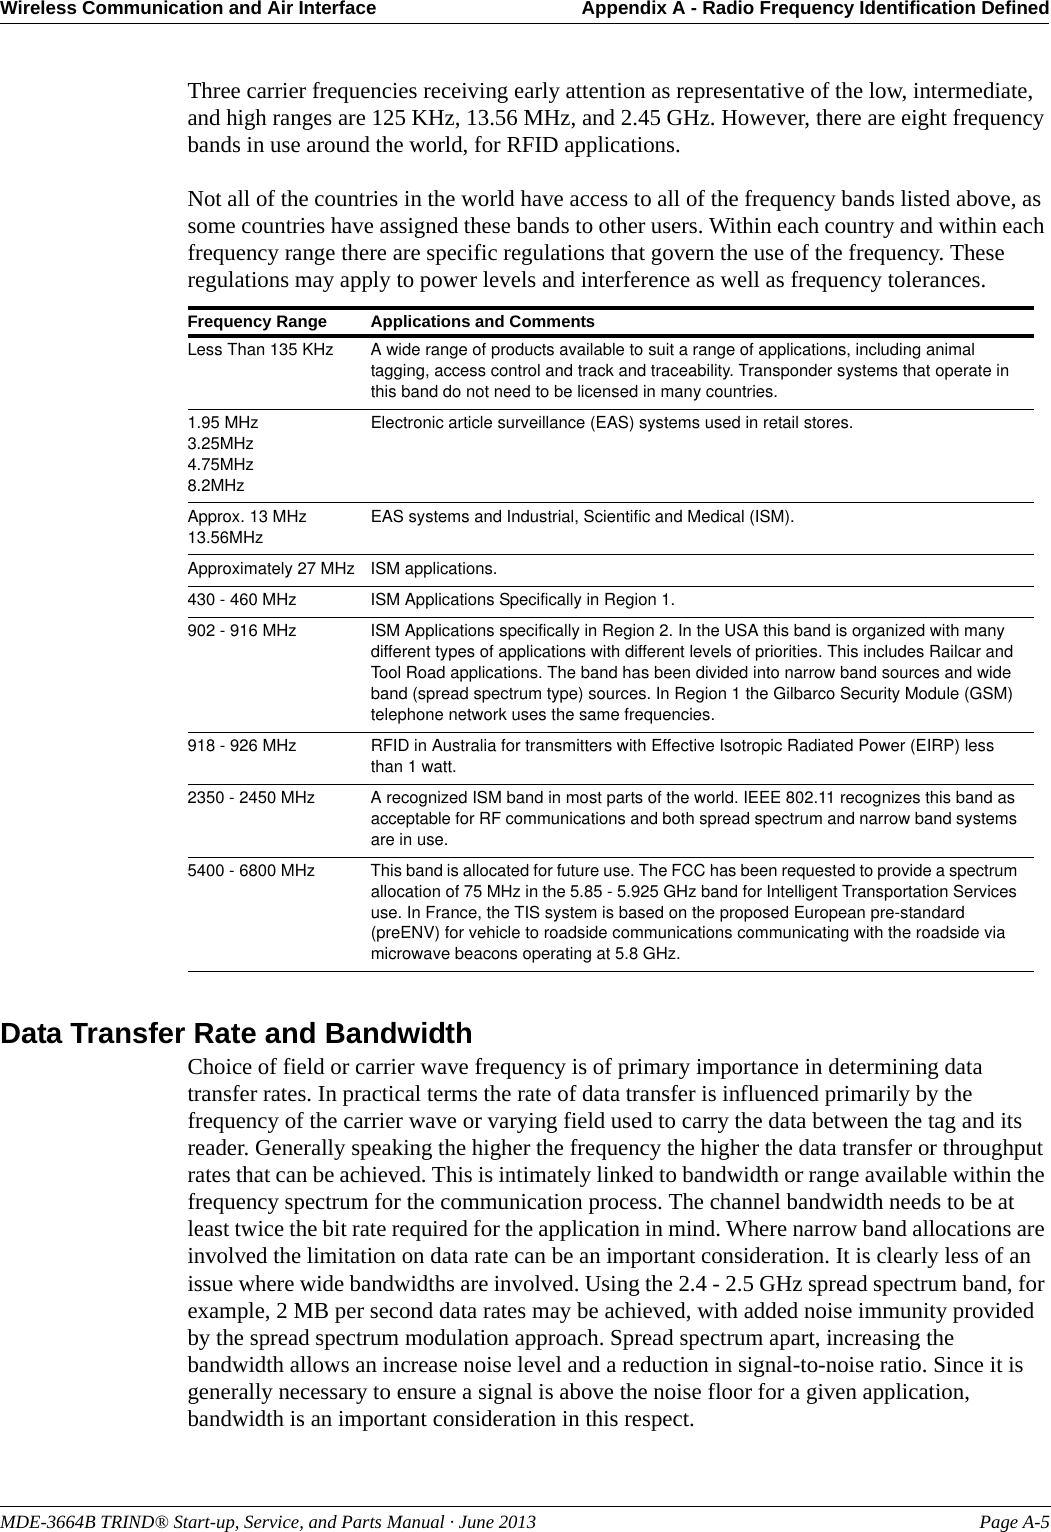 MDE-3664B TRIND® Start-up, Service, and Parts Manual · June 2013 Page A-5Wireless Communication and Air Interface Appendix A - Radio Frequency Identification DefinedThree carrier frequencies receiving early attention as representative of the low, intermediate, and high ranges are 125 KHz, 13.56 MHz, and 2.45 GHz. However, there are eight frequency bands in use around the world, for RFID applications. Not all of the countries in the world have access to all of the frequency bands listed above, as some countries have assigned these bands to other users. Within each country and within each frequency range there are specific regulations that govern the use of the frequency. These regulations may apply to power levels and interference as well as frequency tolerances.Data Transfer Rate and BandwidthChoice of field or carrier wave frequency is of primary importance in determining data transfer rates. In practical terms the rate of data transfer is influenced primarily by the frequency of the carrier wave or varying field used to carry the data between the tag and its reader. Generally speaking the higher the frequency the higher the data transfer or throughput rates that can be achieved. This is intimately linked to bandwidth or range available within the frequency spectrum for the communication process. The channel bandwidth needs to be at least twice the bit rate required for the application in mind. Where narrow band allocations are involved the limitation on data rate can be an important consideration. It is clearly less of an issue where wide bandwidths are involved. Using the 2.4 - 2.5 GHz spread spectrum band, for example, 2 MB per second data rates may be achieved, with added noise immunity provided by the spread spectrum modulation approach. Spread spectrum apart, increasing the bandwidth allows an increase noise level and a reduction in signal-to-noise ratio. Since it is generally necessary to ensure a signal is above the noise floor for a given application, bandwidth is an important consideration in this respect.Frequency Range Applications and CommentsLess Than 135 KHz A wide range of products available to suit a range of applications, including animal tagging, access control and track and traceability. Transponder systems that operate in this band do not need to be licensed in many countries.1.95 MHz3.25MHz4.75MHz8.2MHzElectronic article surveillance (EAS) systems used in retail stores.Approx. 13 MHz13.56MHzEAS systems and Industrial, Scientific and Medical (ISM).Approximately 27 MHz ISM applications.430 - 460 MHz ISM Applications Specifically in Region 1.902 - 916 MHz ISM Applications specifically in Region 2. In the USA this band is organized with many different types of applications with different levels of priorities. This includes Railcar and Tool Road applications. The band has been divided into narrow band sources and wide band (spread spectrum type) sources. In Region 1 the Gilbarco Security Module (GSM) telephone network uses the same frequencies.918 - 926 MHz RFID in Australia for transmitters with Effective Isotropic Radiated Power (EIRP) less than 1 watt.2350 - 2450 MHz A recognized ISM band in most parts of the world. IEEE 802.11 recognizes this band as acceptable for RF communications and both spread spectrum and narrow band systems are in use.5400 - 6800 MHz This band is allocated for future use. The FCC has been requested to provide a spectrum allocation of 75 MHz in the 5.85 - 5.925 GHz band for Intelligent Transportation Services use. In France, the TIS system is based on the proposed European pre-standard (preENV) for vehicle to roadside communications communicating with the roadside via microwave beacons operating at 5.8 GHz.